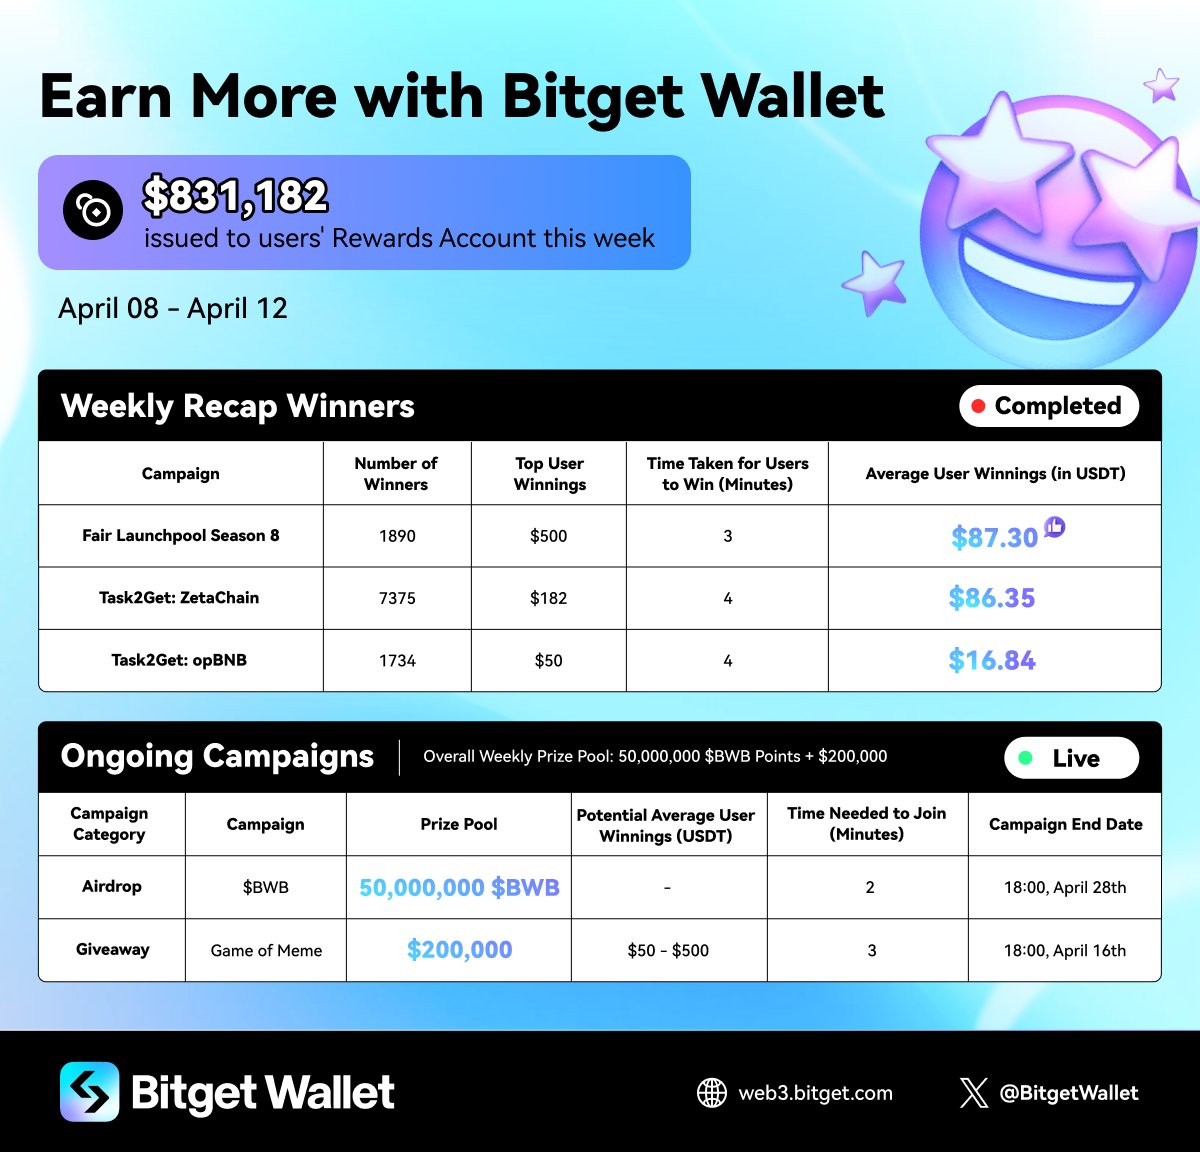 Earning more with #BitgetWallet yet?

Start winning NOW with us! Easy to enter campaigns to with great returns 👀 Maximum of 3 mins needed!

Use Bitget Wallet app ➡️ Earning Center, and participate now! Don't fade on us 🩵